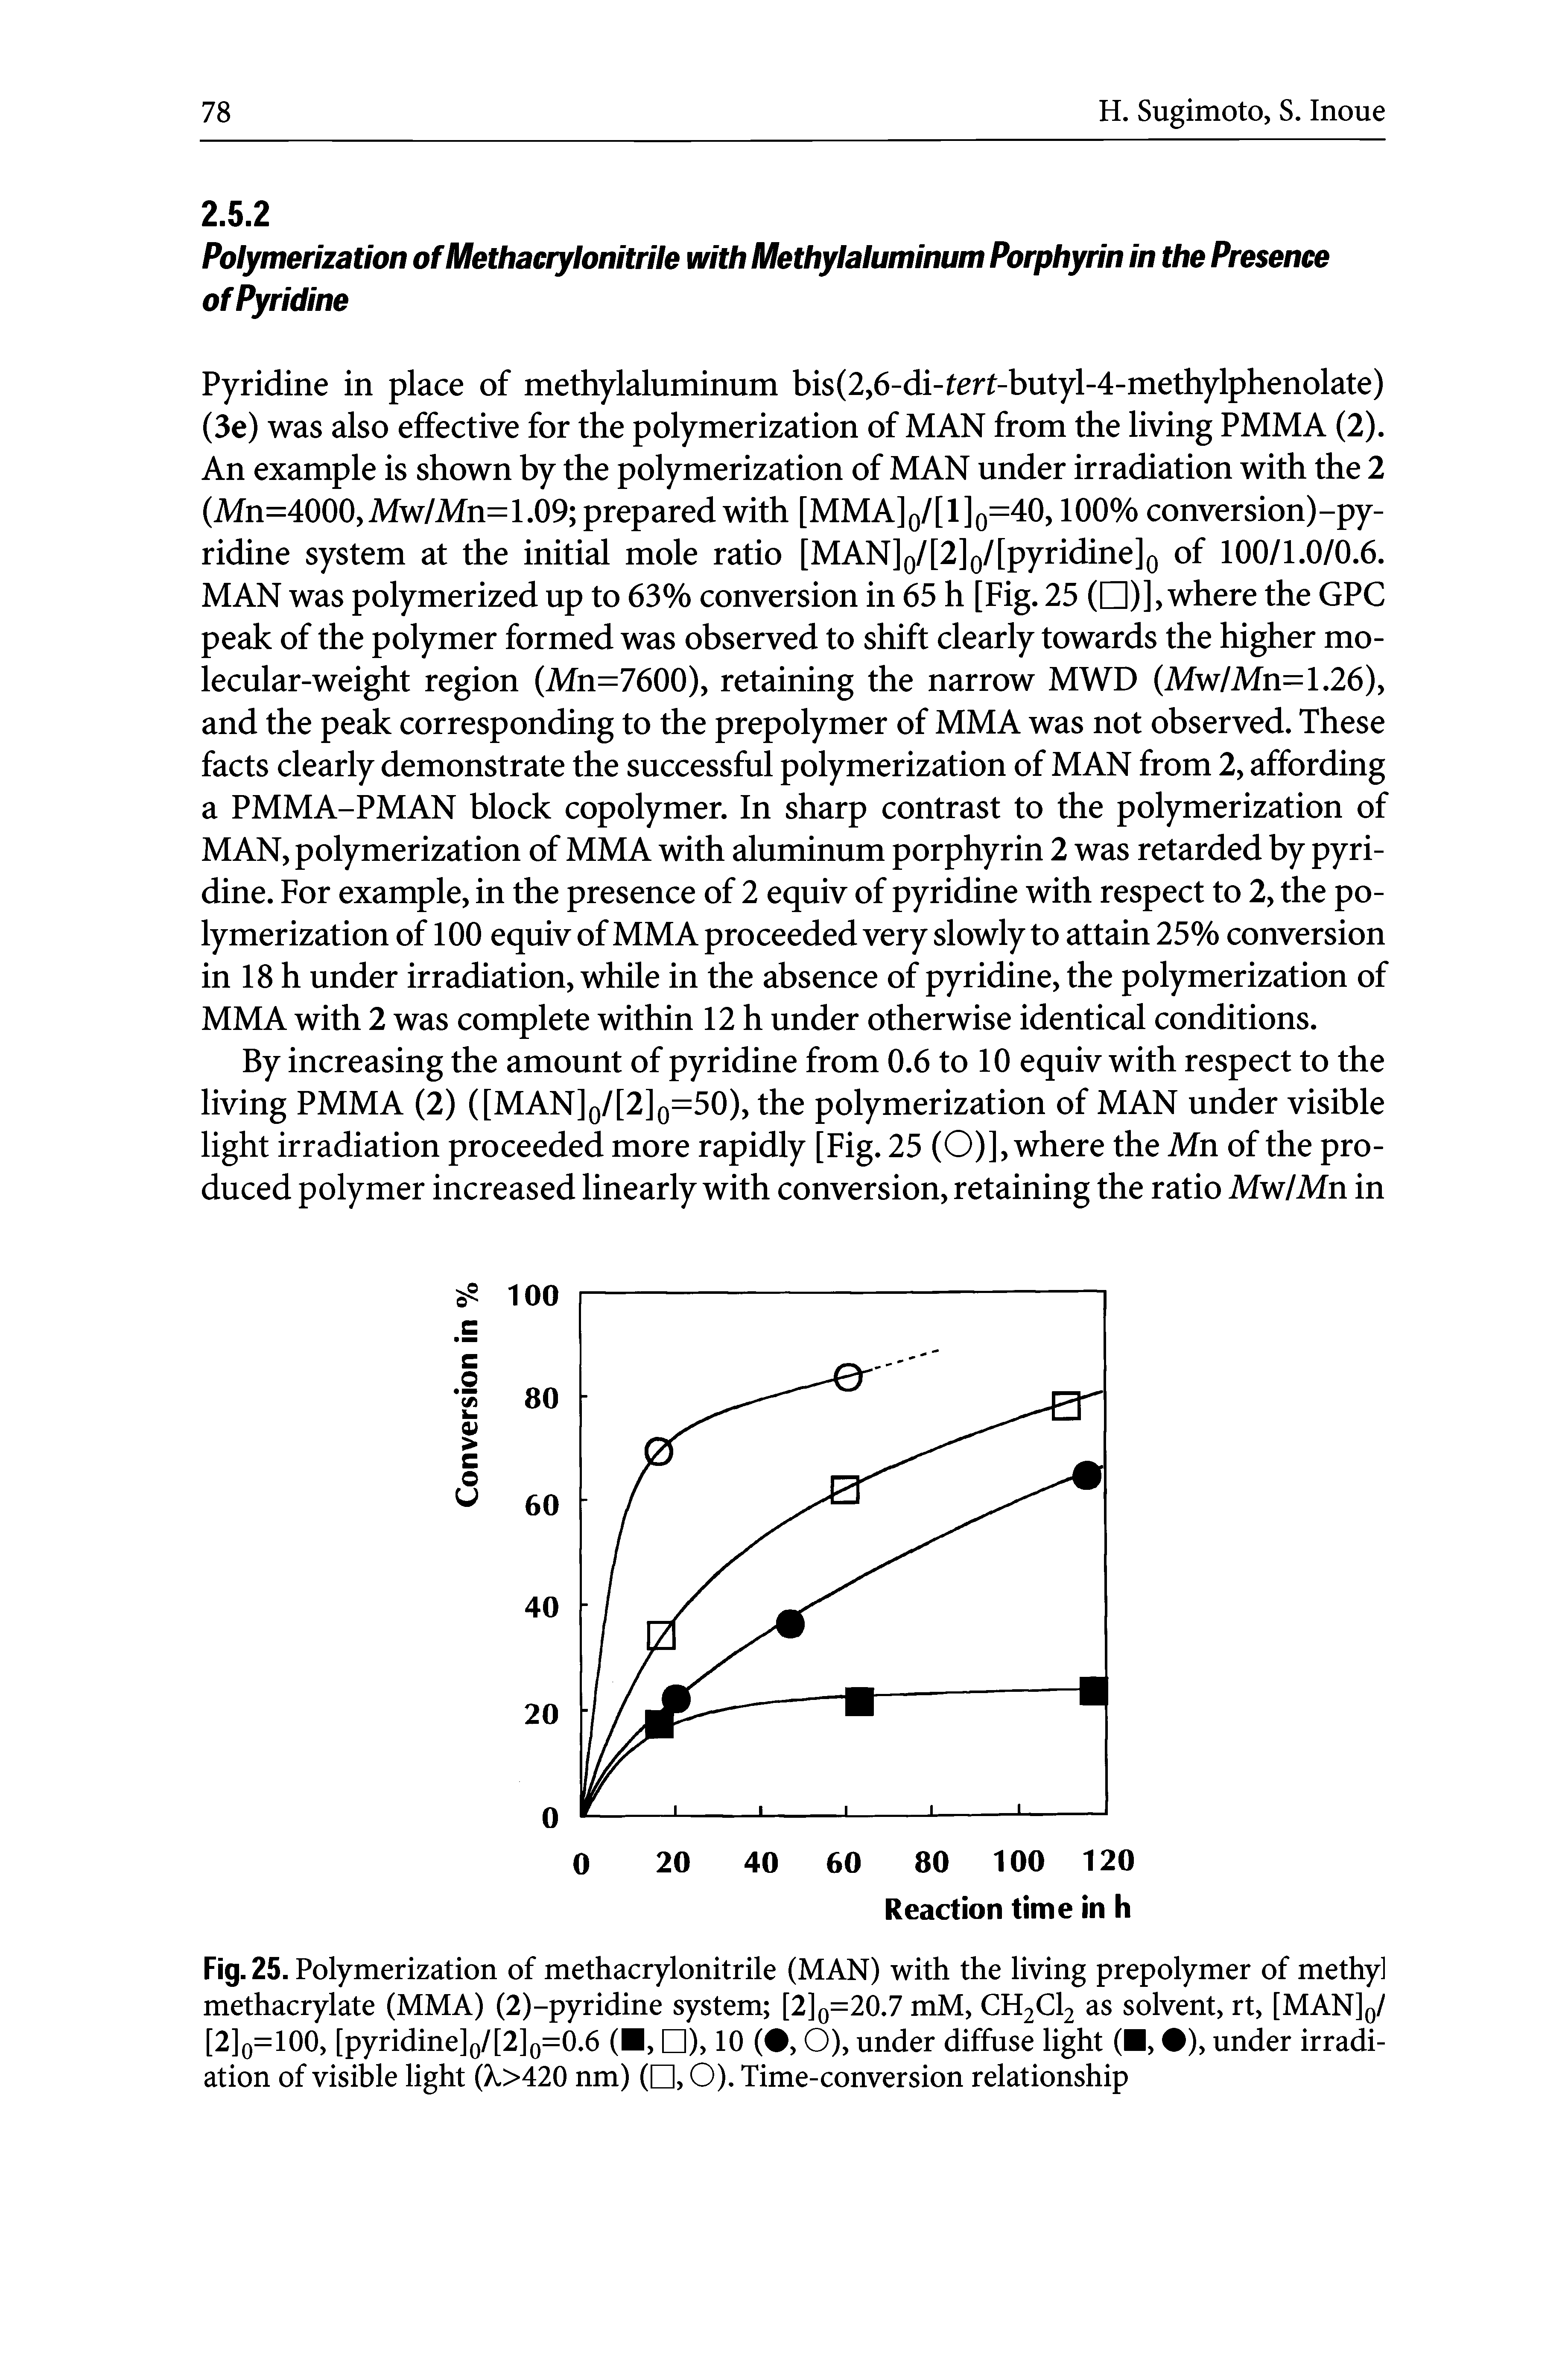 Fig. 25. Polymerization of methacrylonitrile (MAN) with the living prepolymer of methyl methacrylate (MMA) (2)-pyridine system [2]q=20.7 mM, CH2CI2 as solvent, rt, [MAN]q/ [2]o=100, [pyridine]o/[2]o=0.6 ( , ), 10 ( , O), under diffuse light ( , ), under irradiation of visible light (> >420 nm) ( , O). Time-conversion relationship...